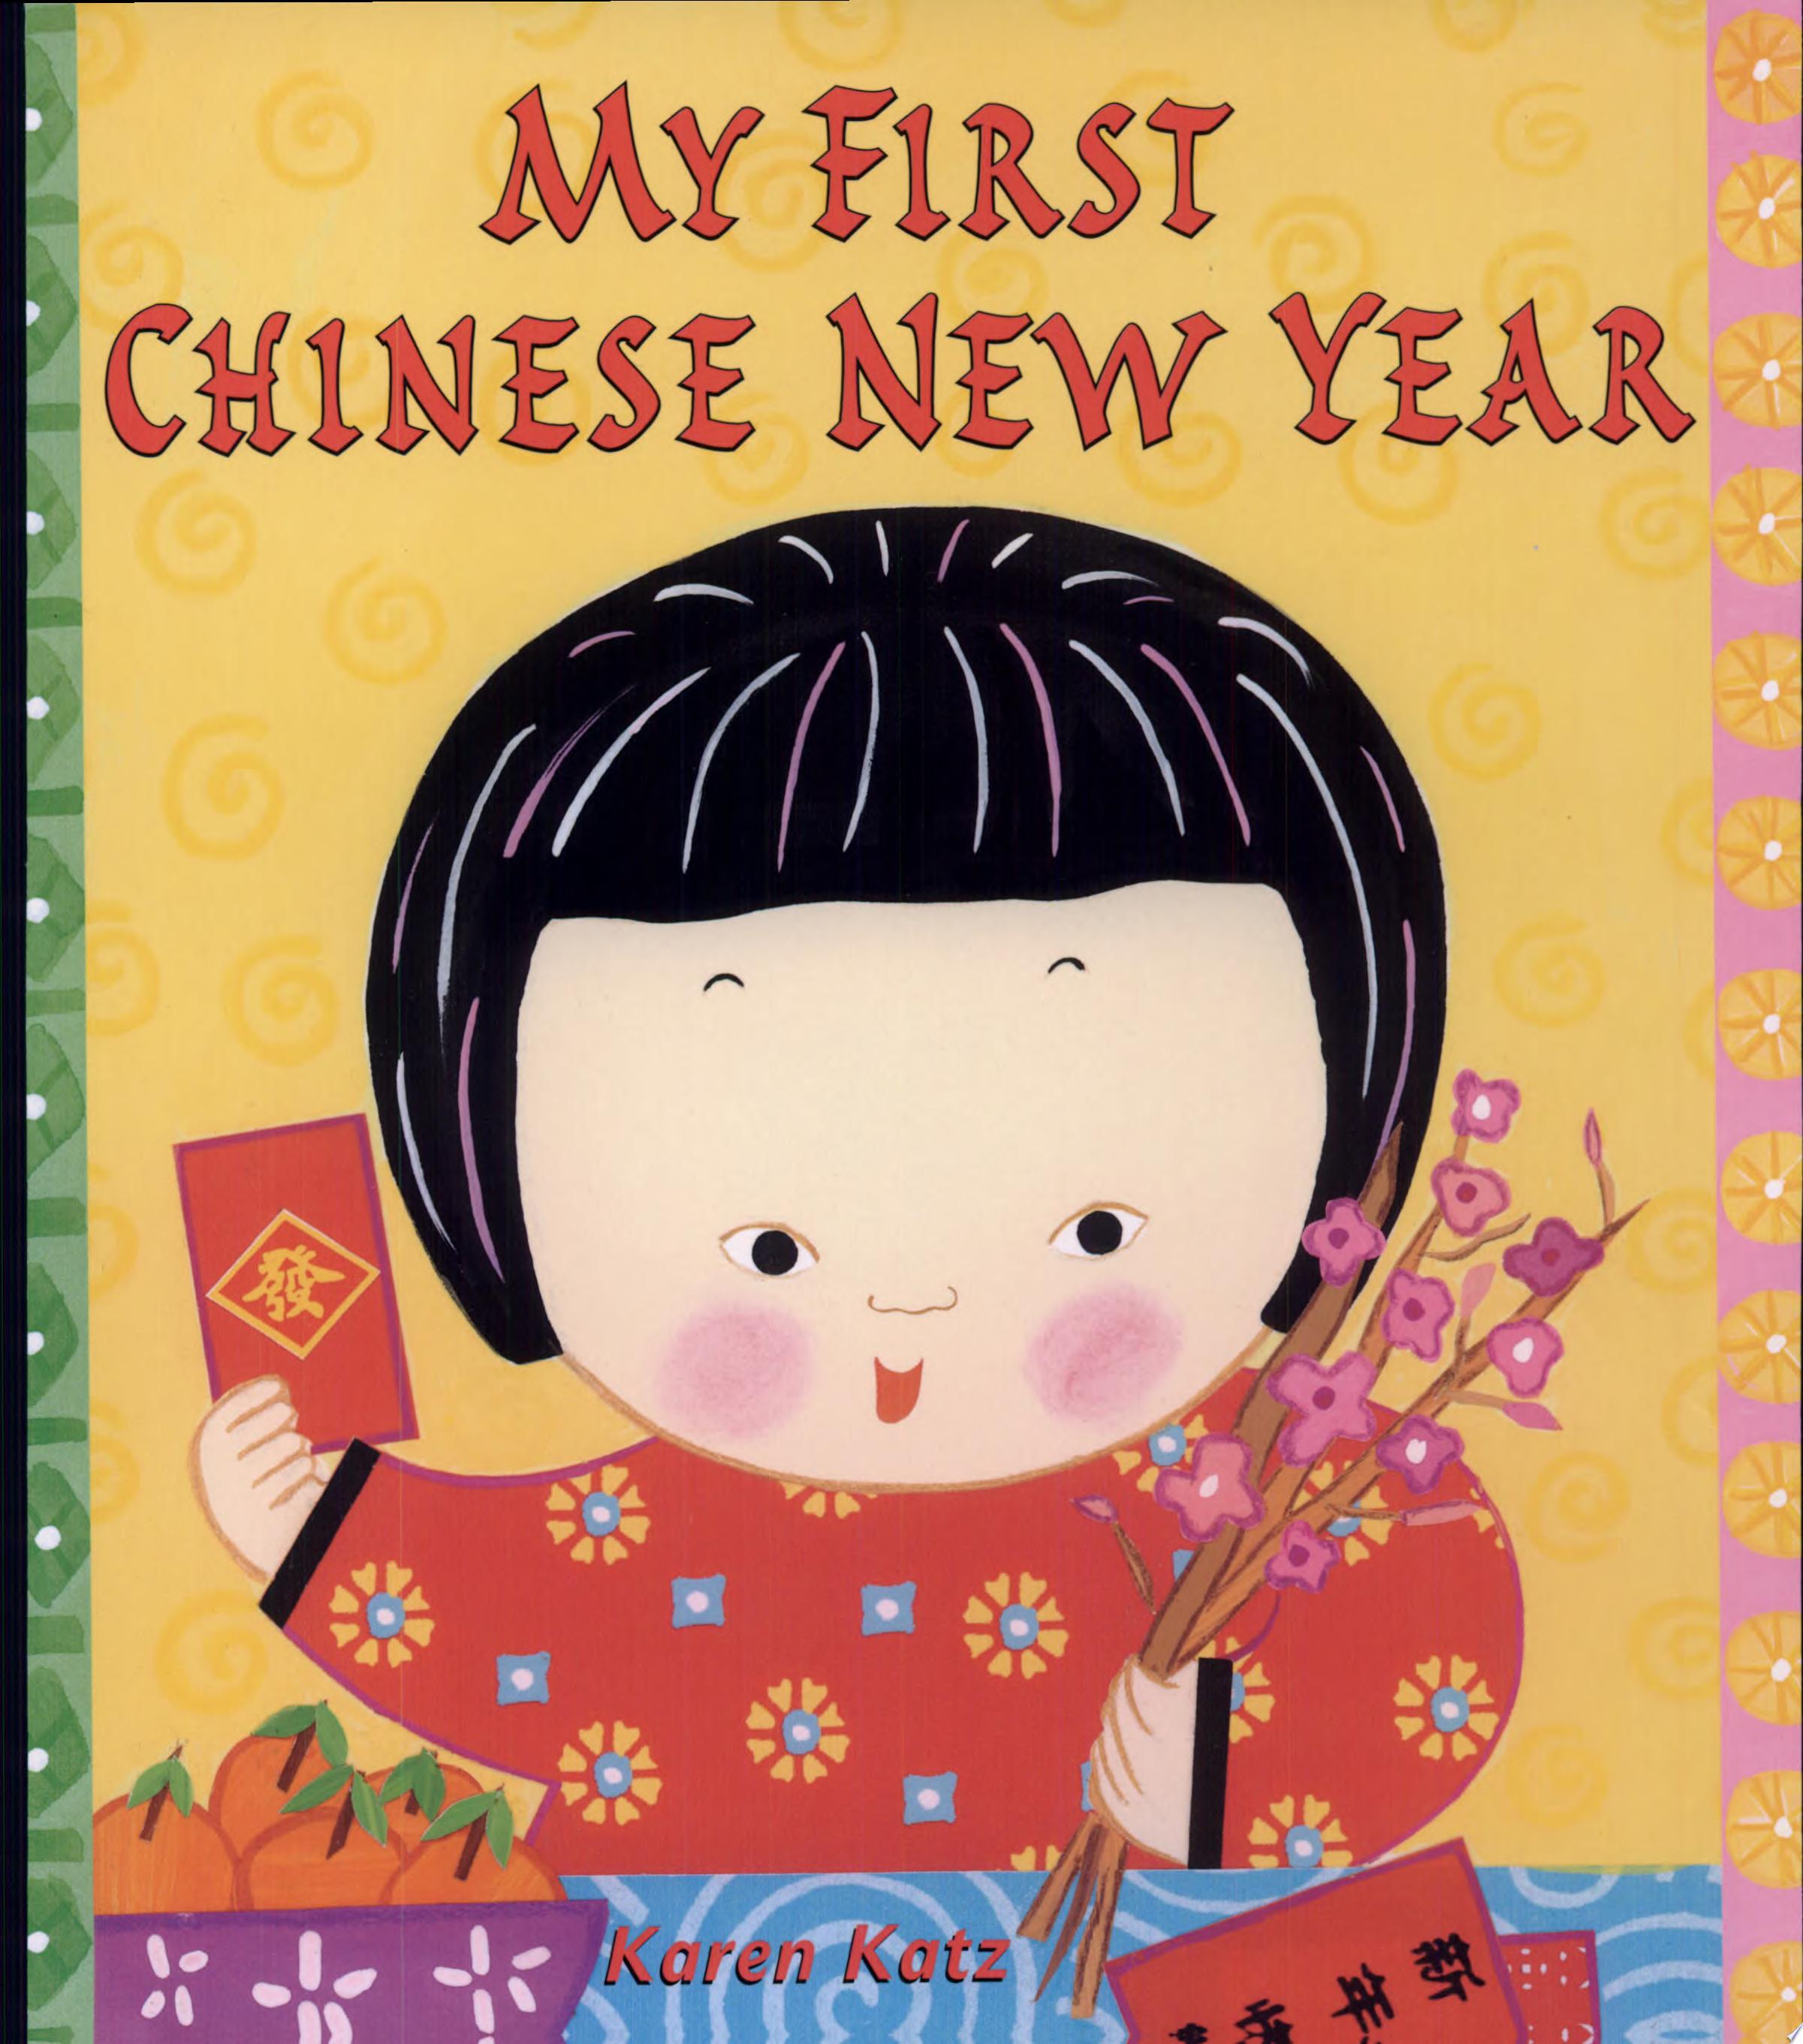 Image for "My First Chinese New Year"